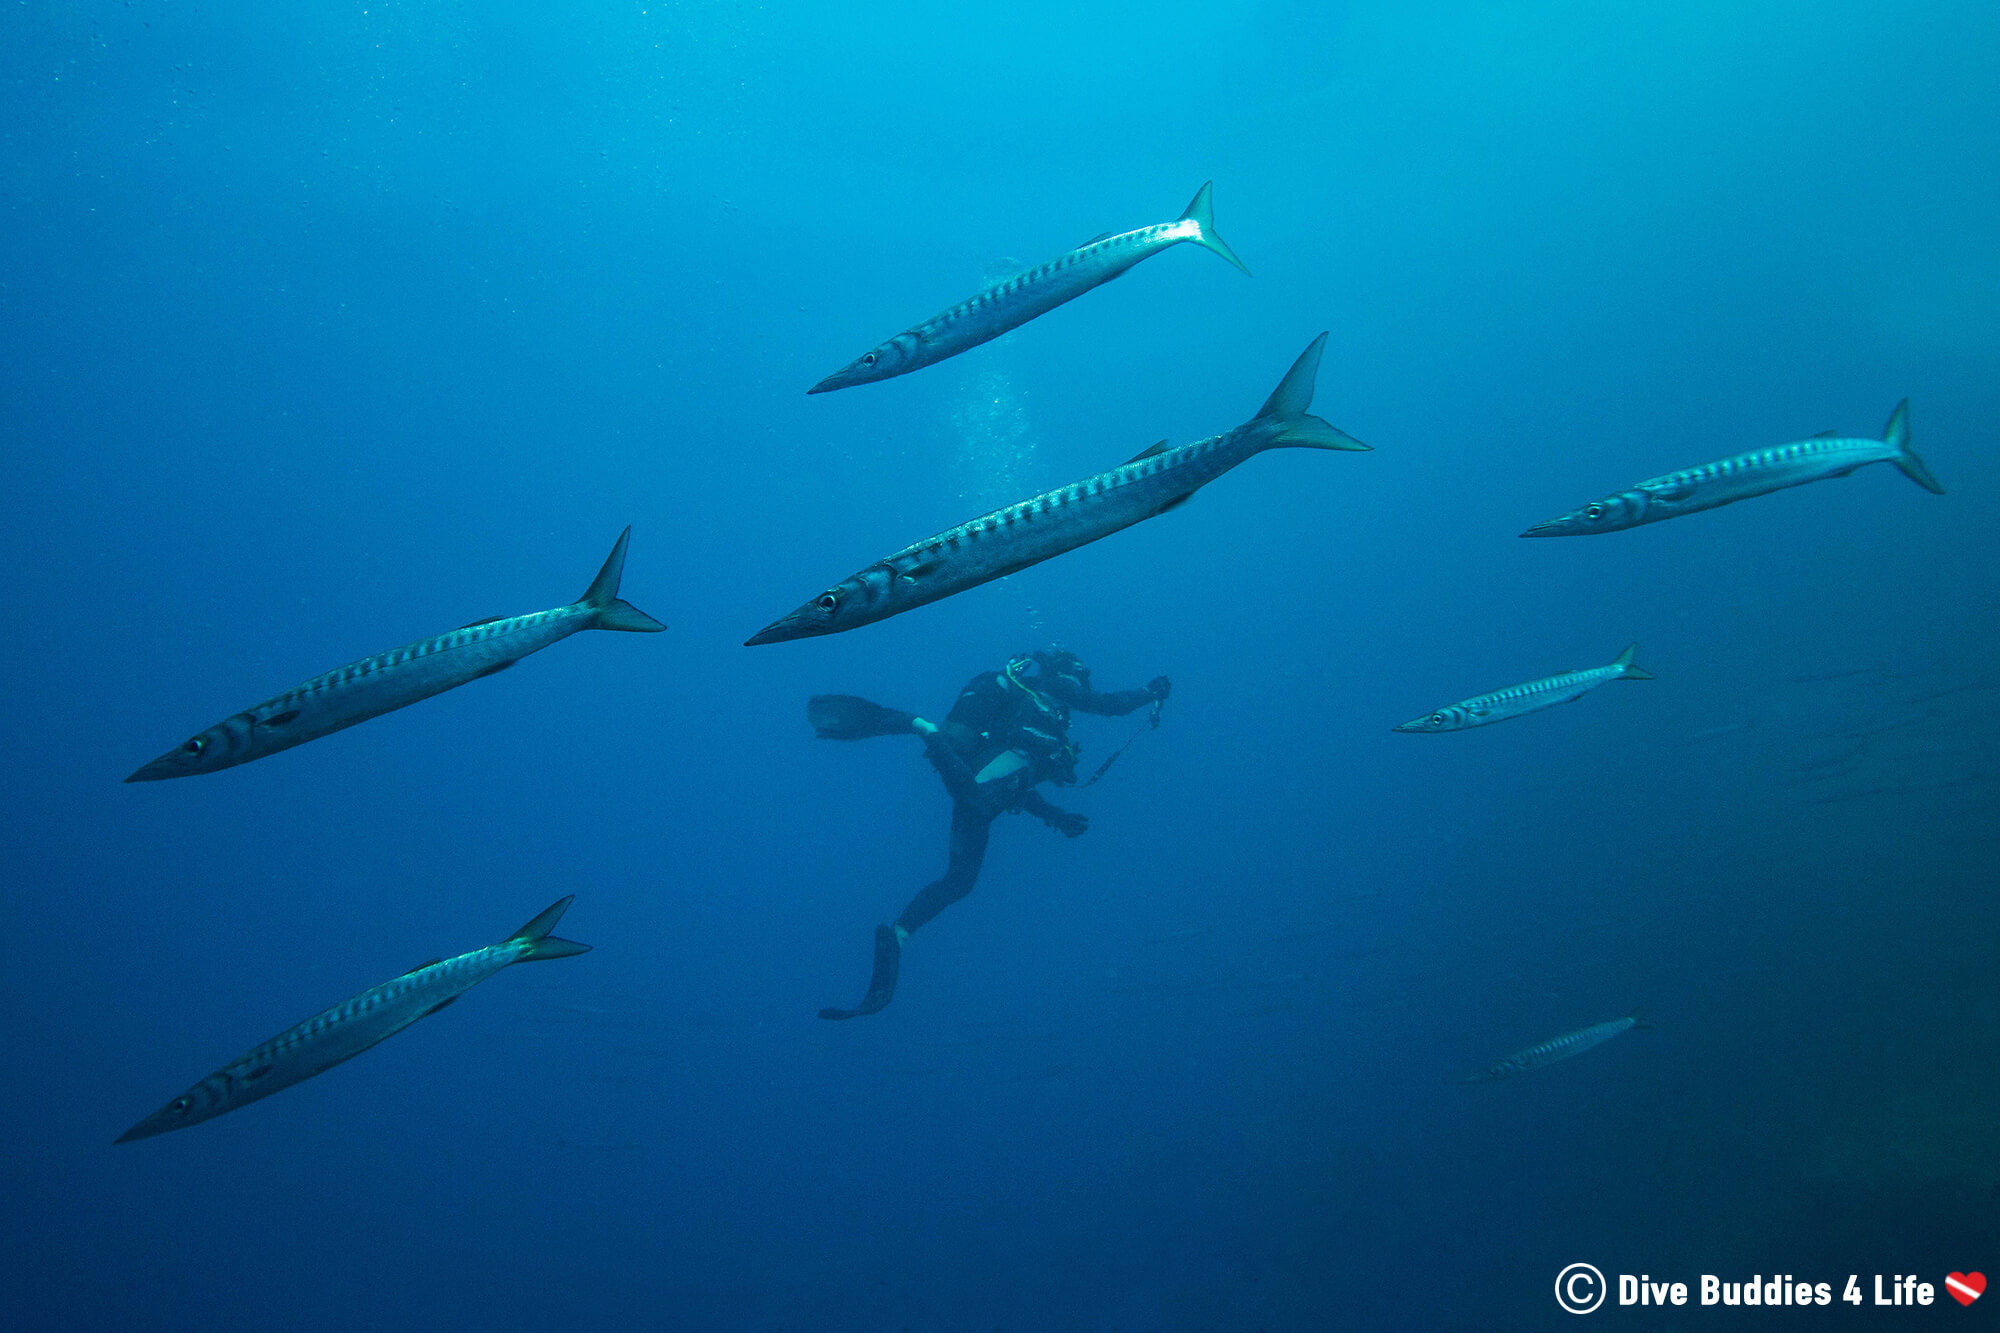 Joey Scuba Diving In The Middle Of A Large School Of Barracuda In Sorrento Italy, The Amalfi Coast. Europe